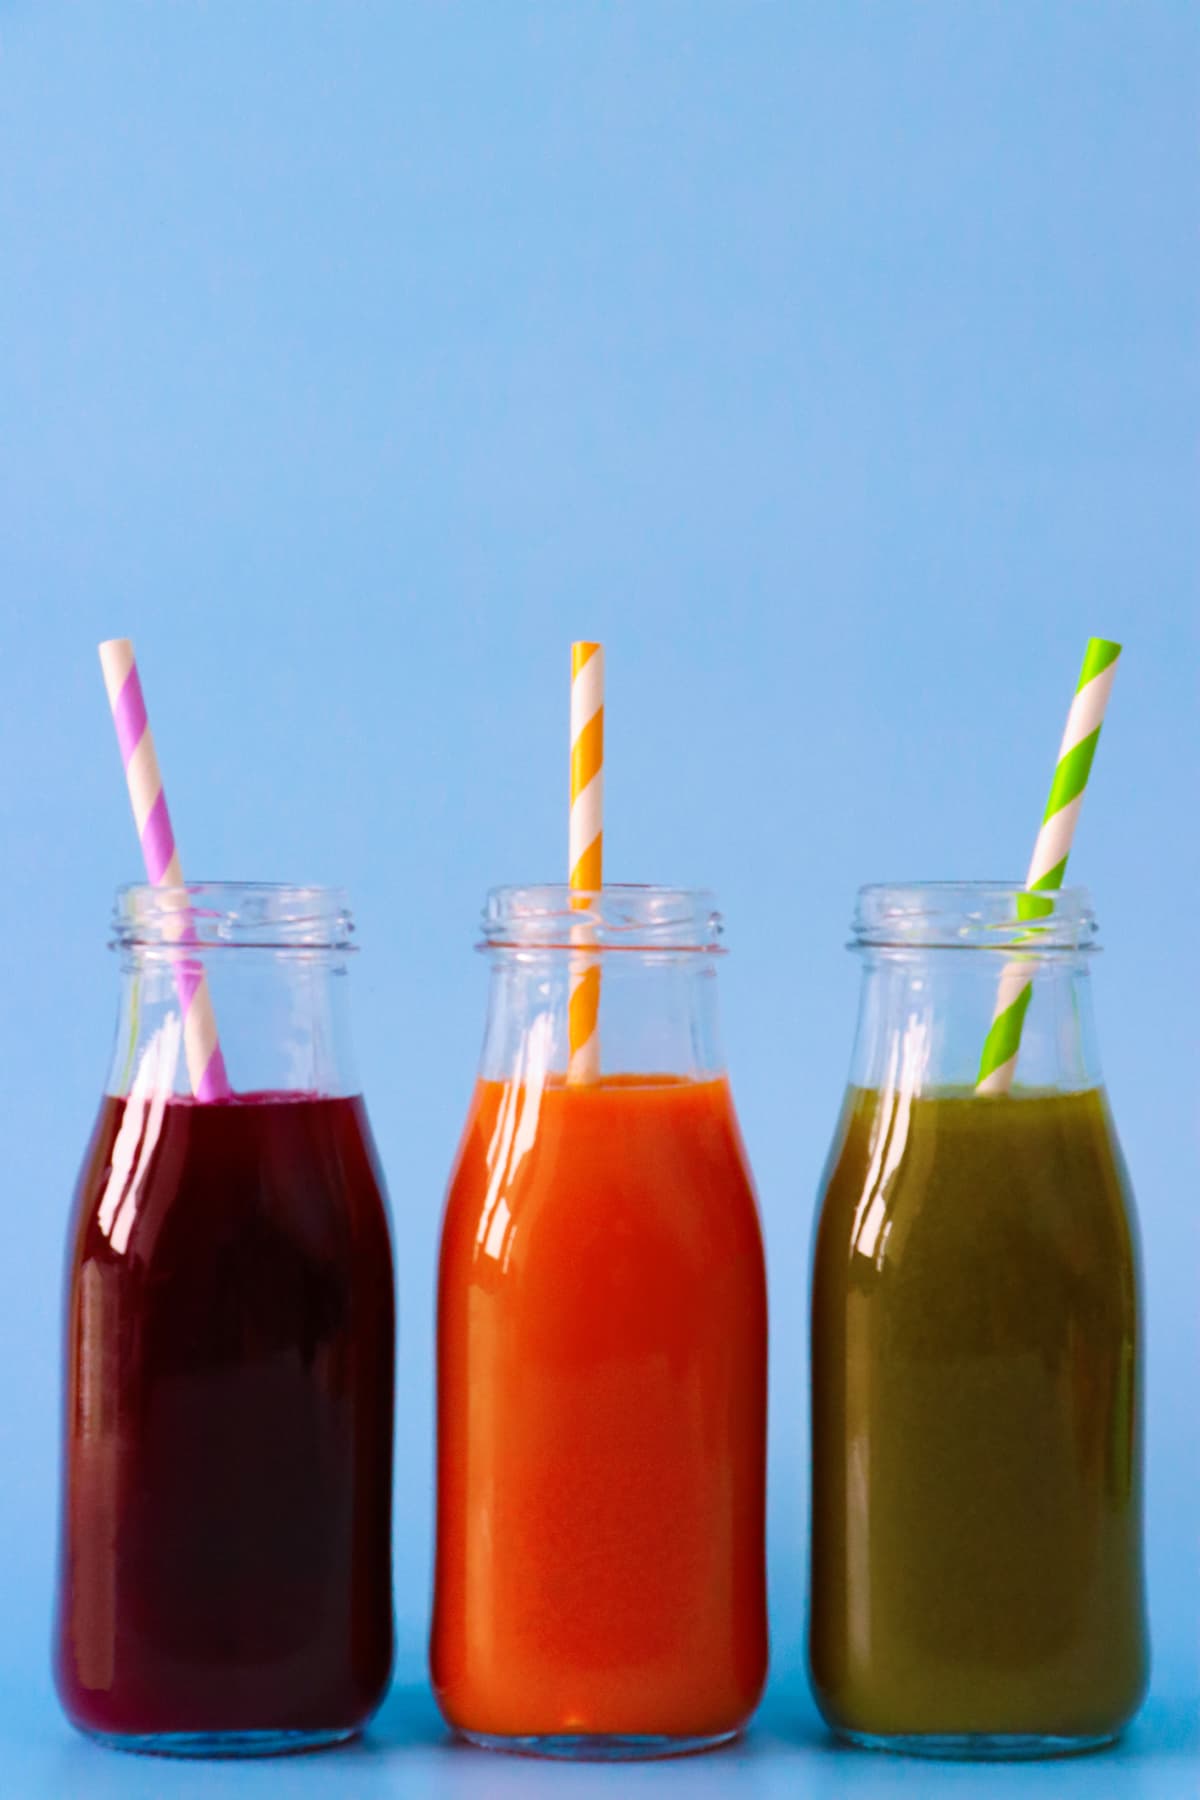 Three different fruit vegetable smoothies served in vintage bottles with striped straws featuring a blue background